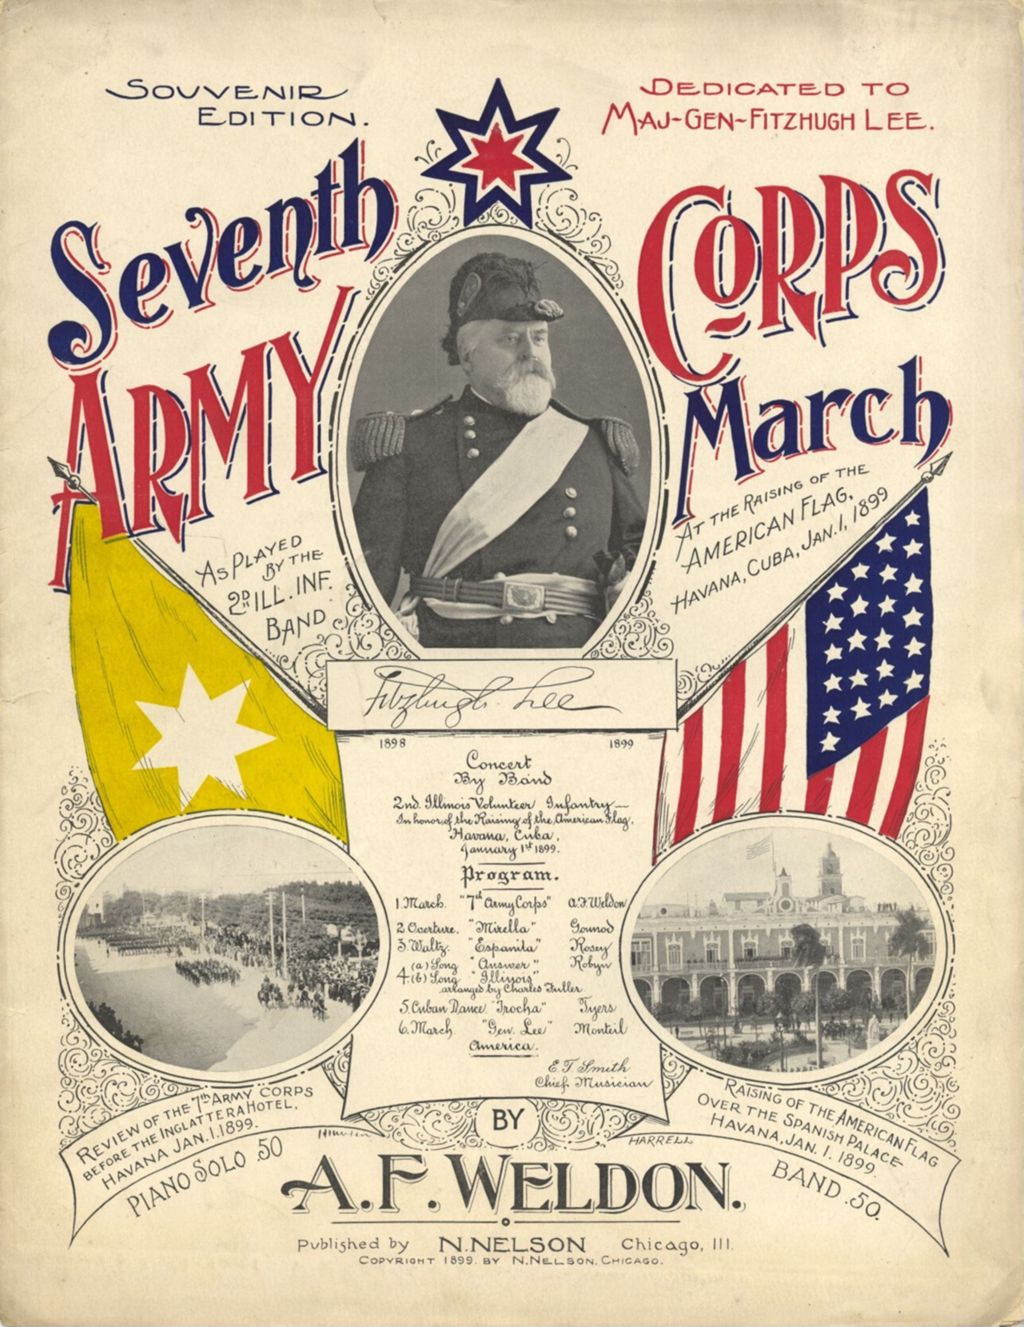 Seventh Army Corps March